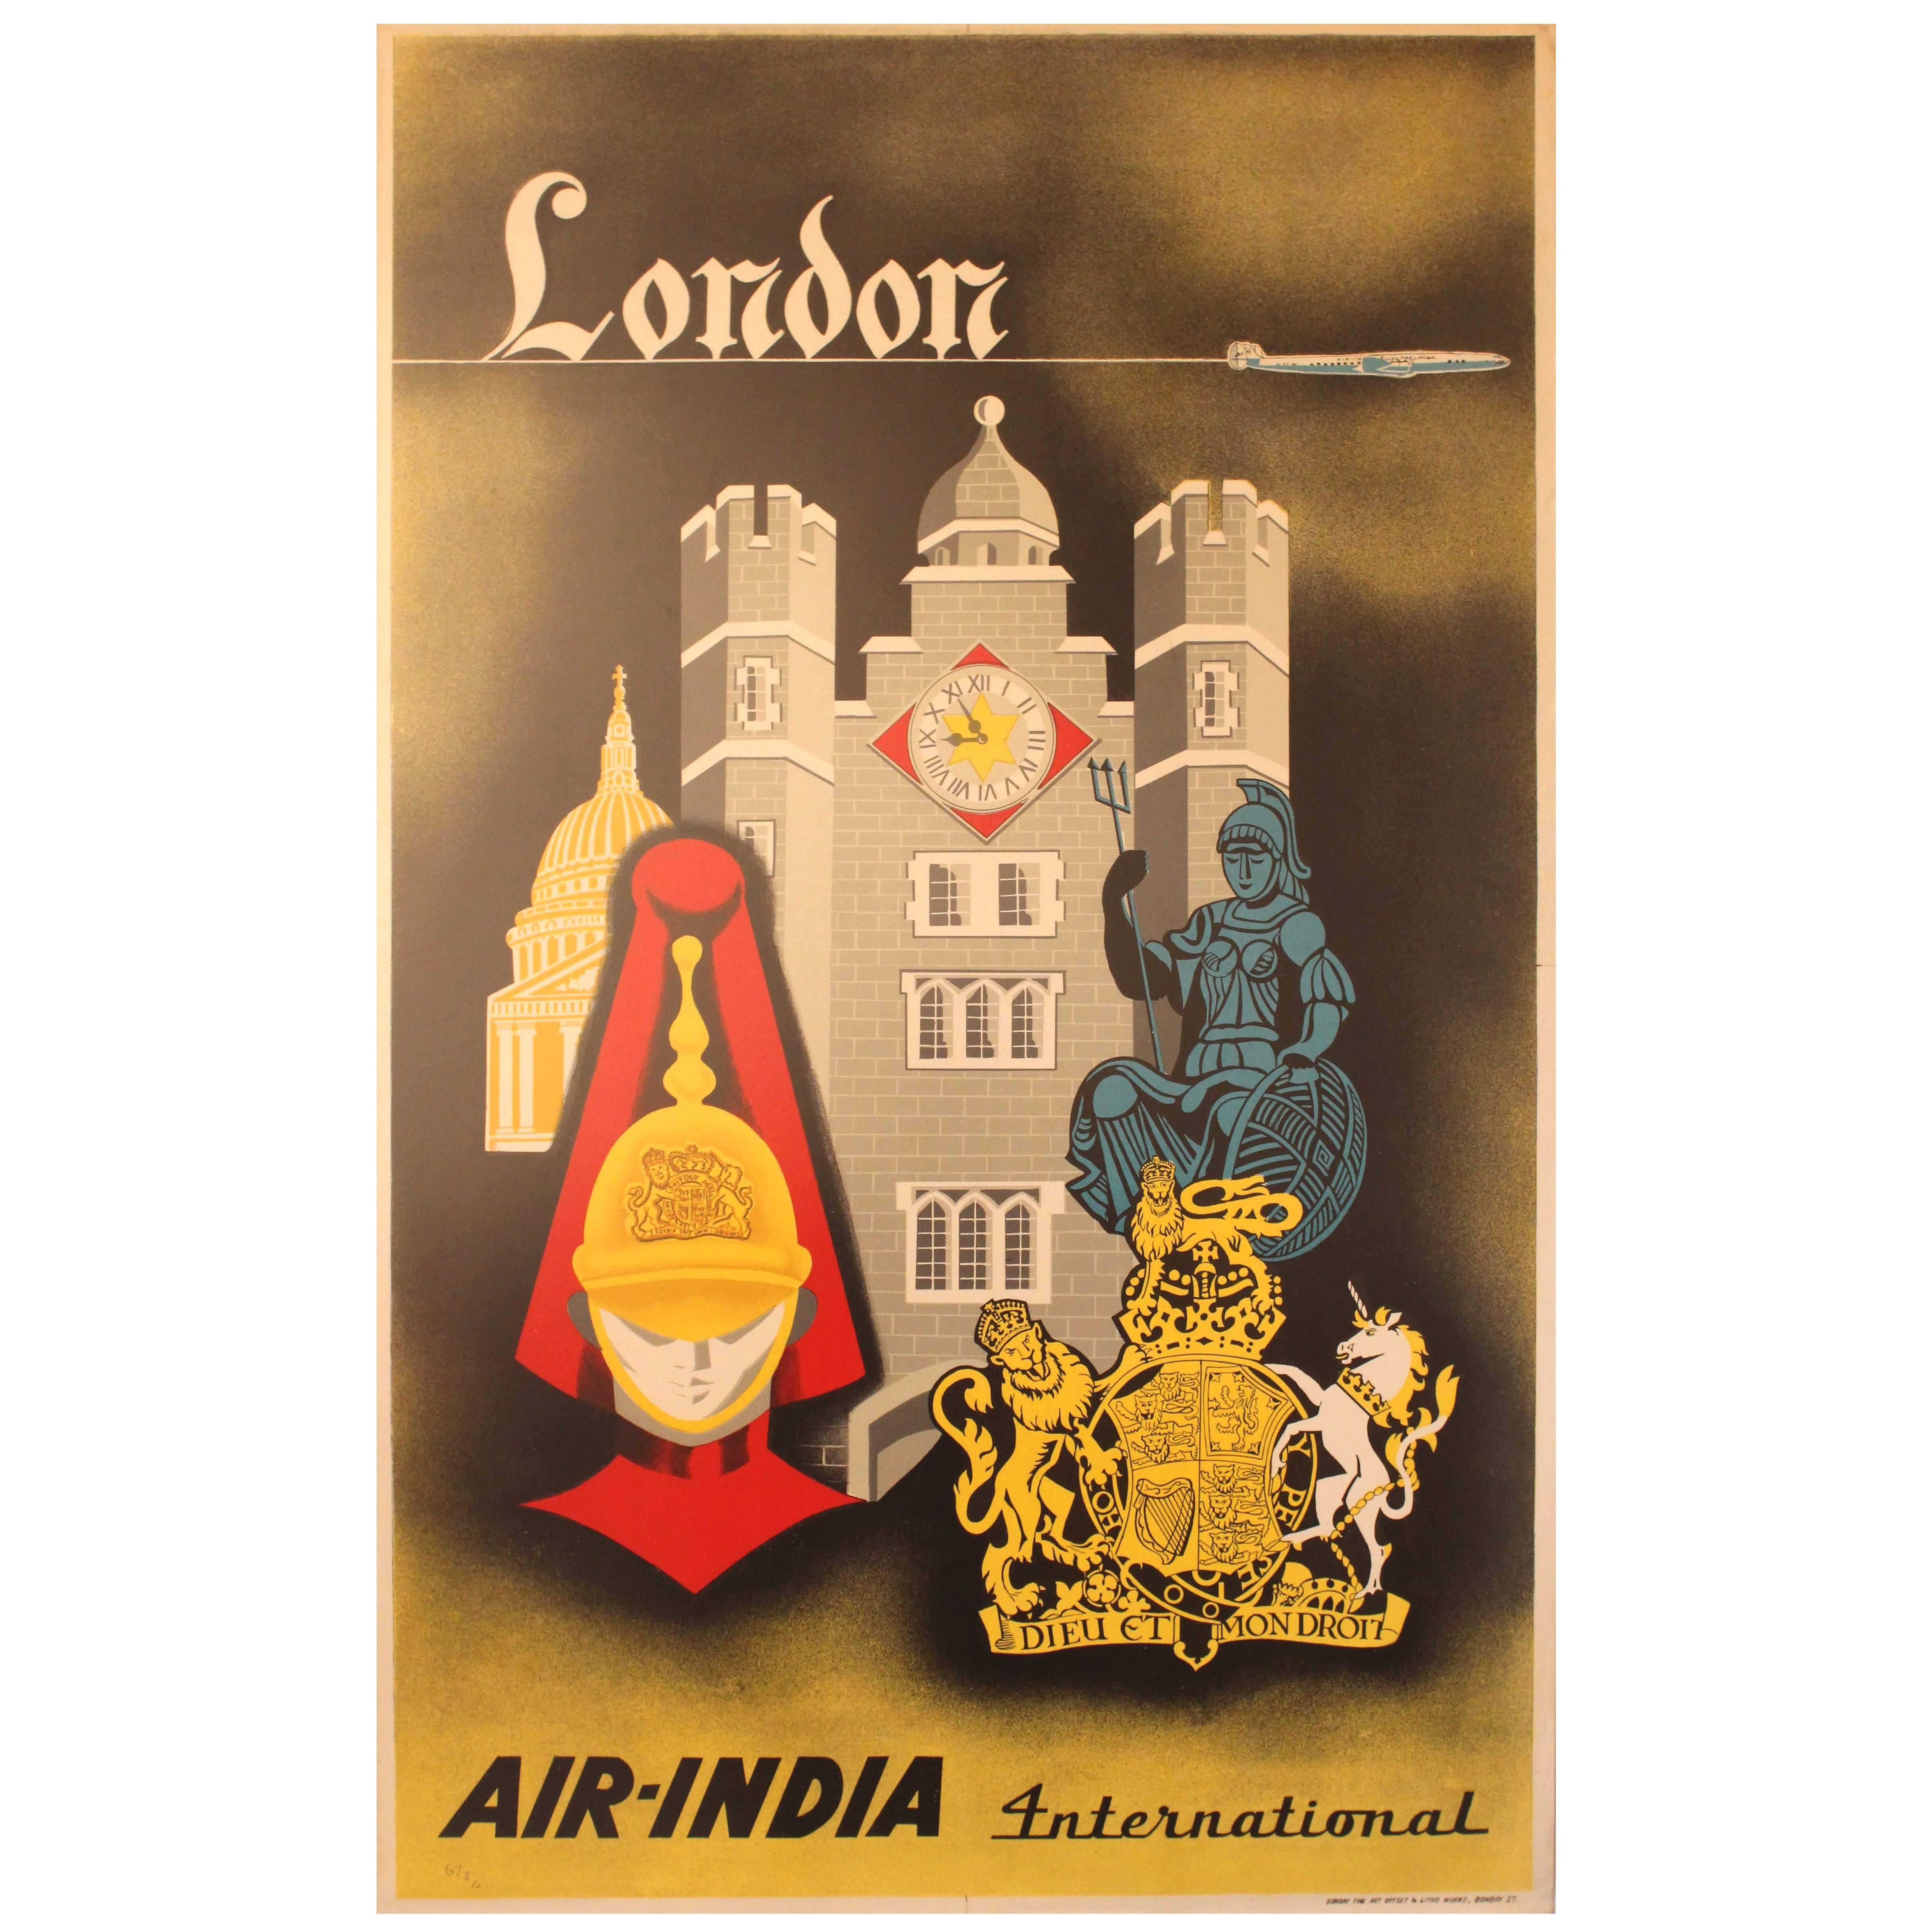 Original Vintage Travel Advertising Poster for London by Air India International